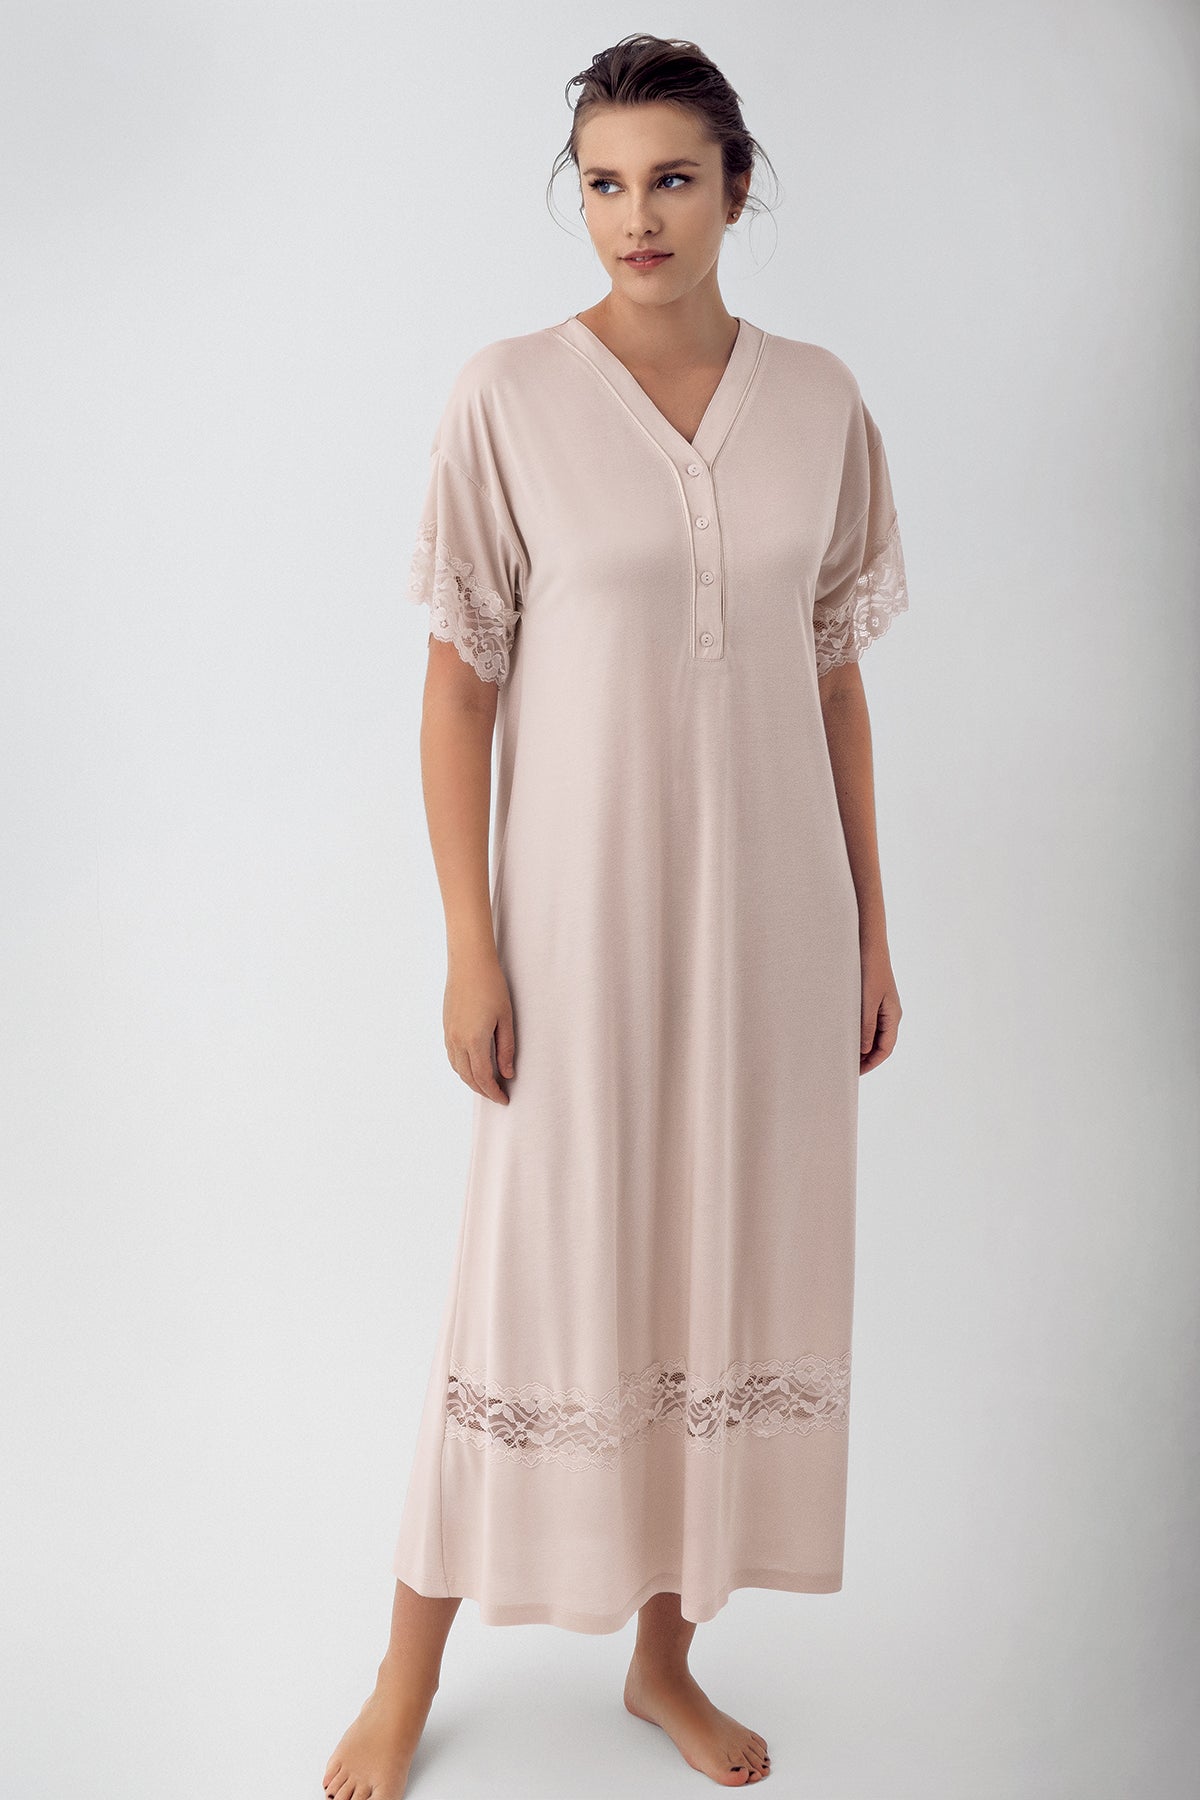 Lace Sleeve Maternity & Nursing Nightgown Dried Rose - 16111